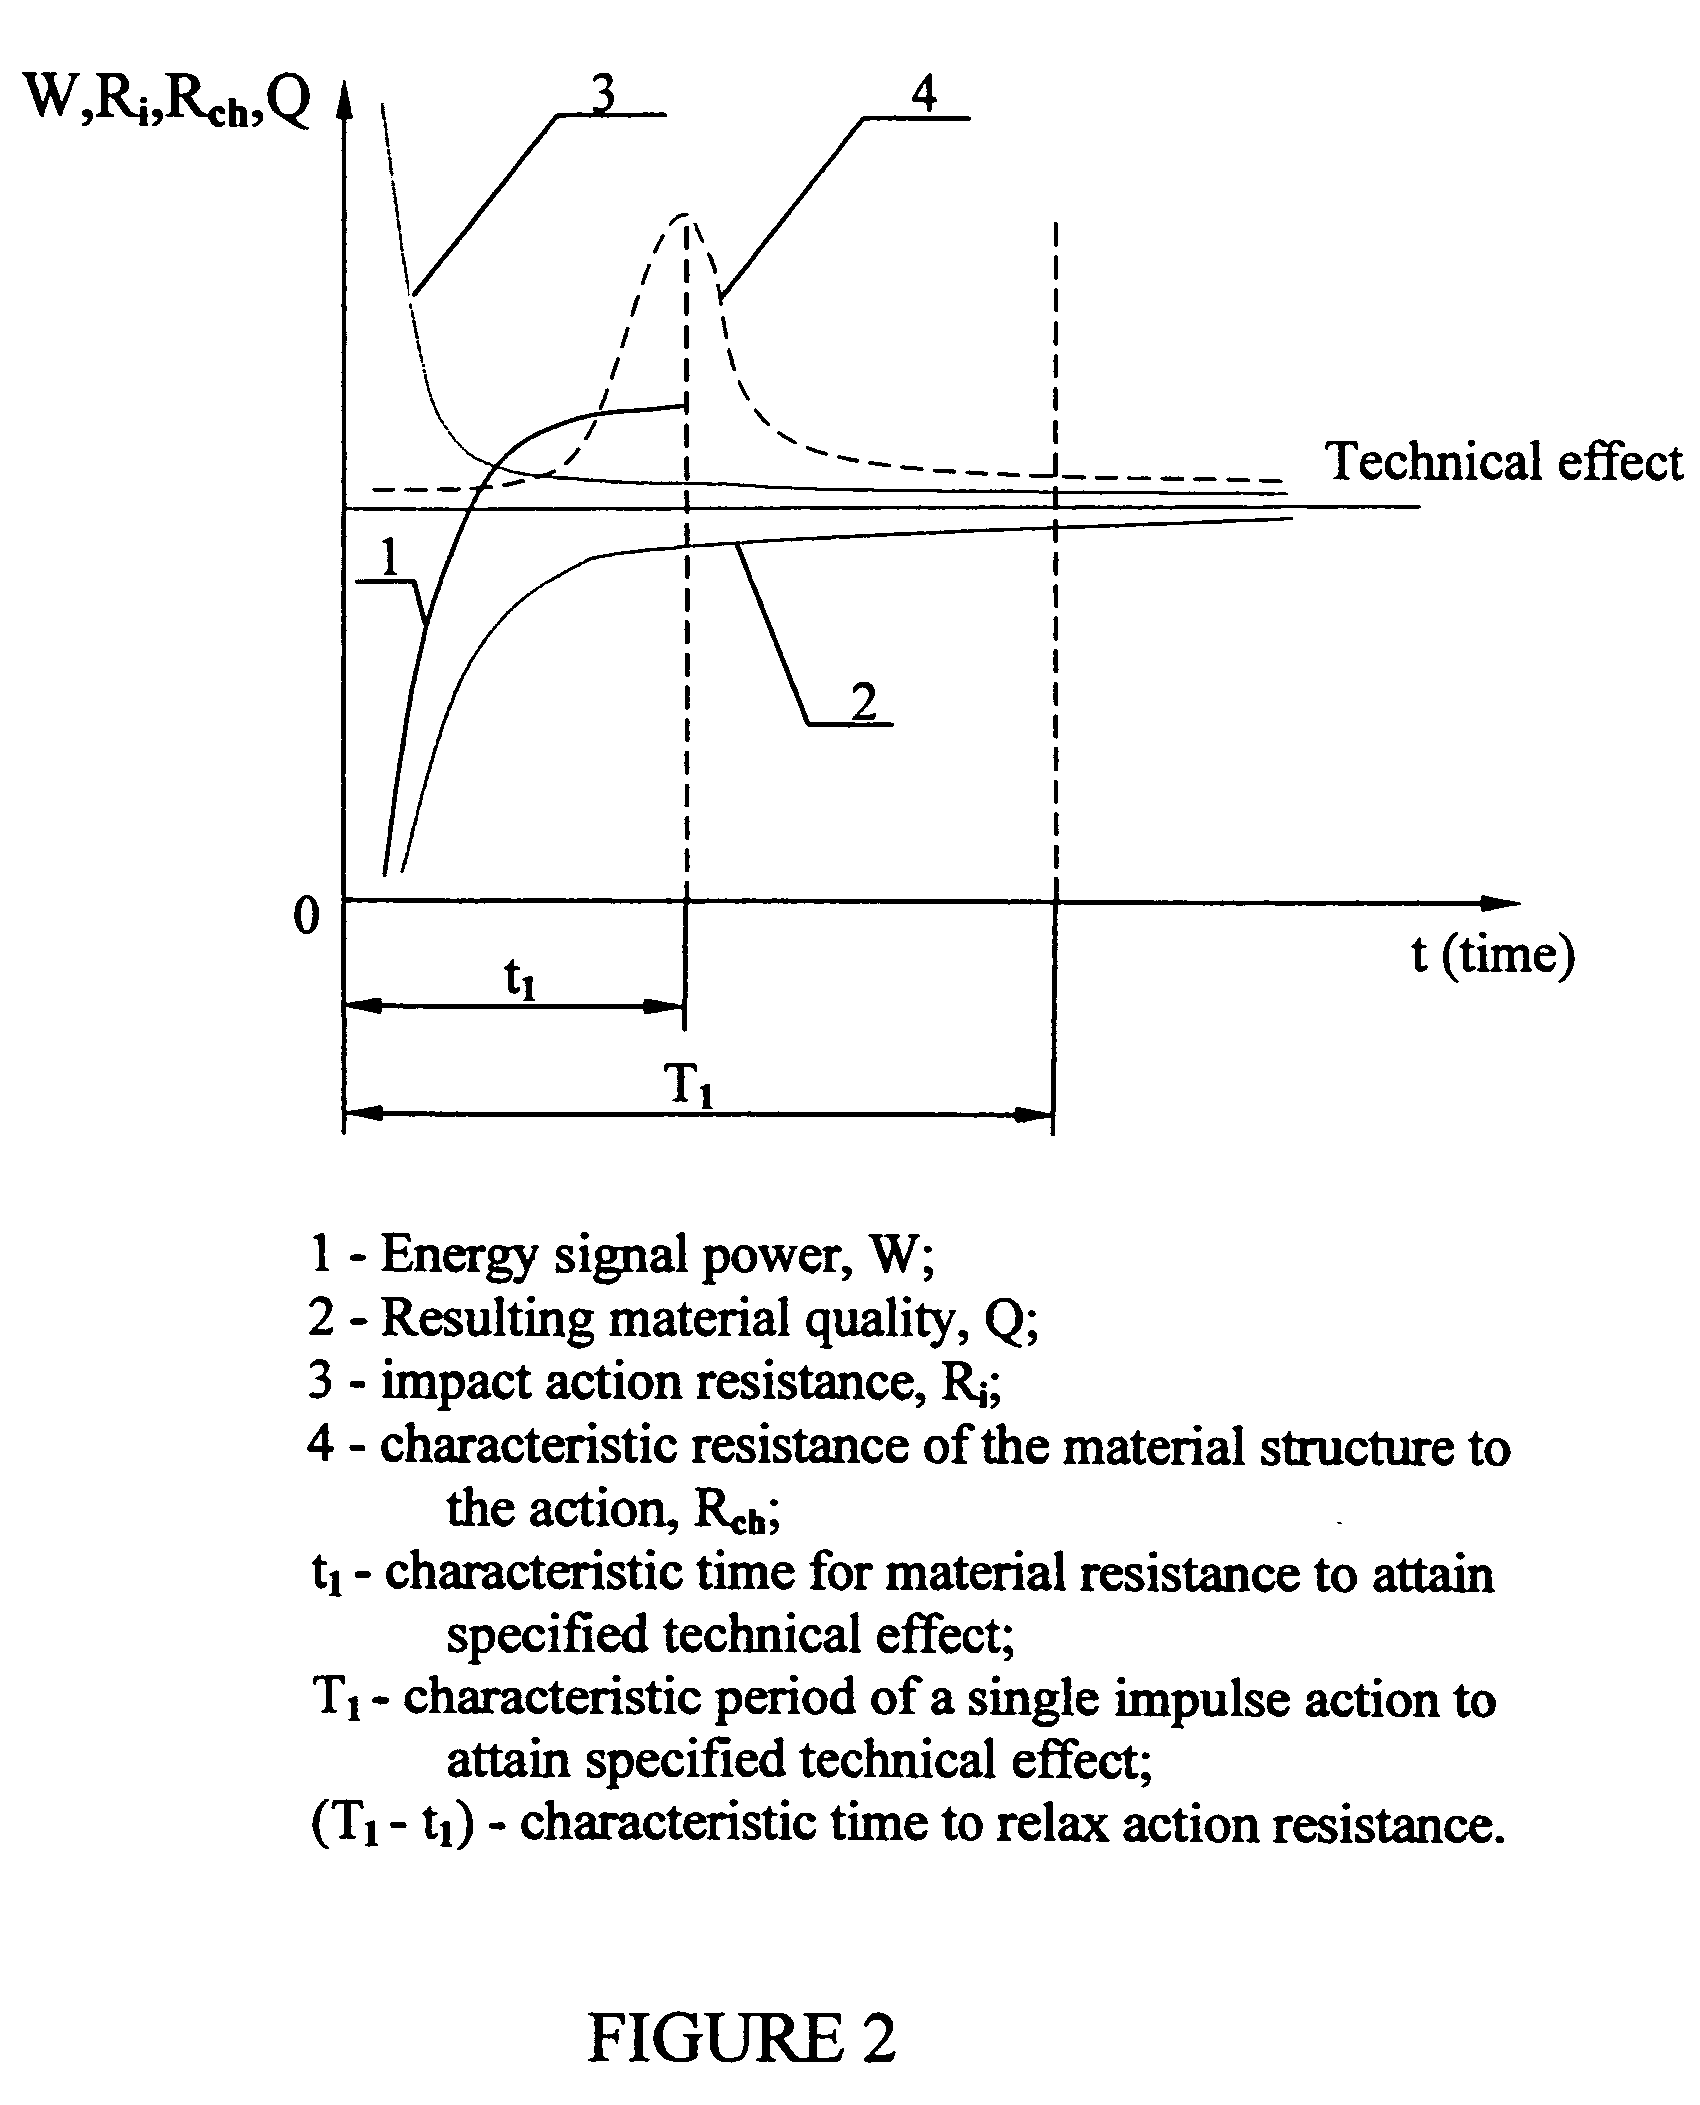 Method for modifying or producing materials and joints with specific properties by generating and applying adaptive impulses a normalizing energy thereof and pauses therebetween